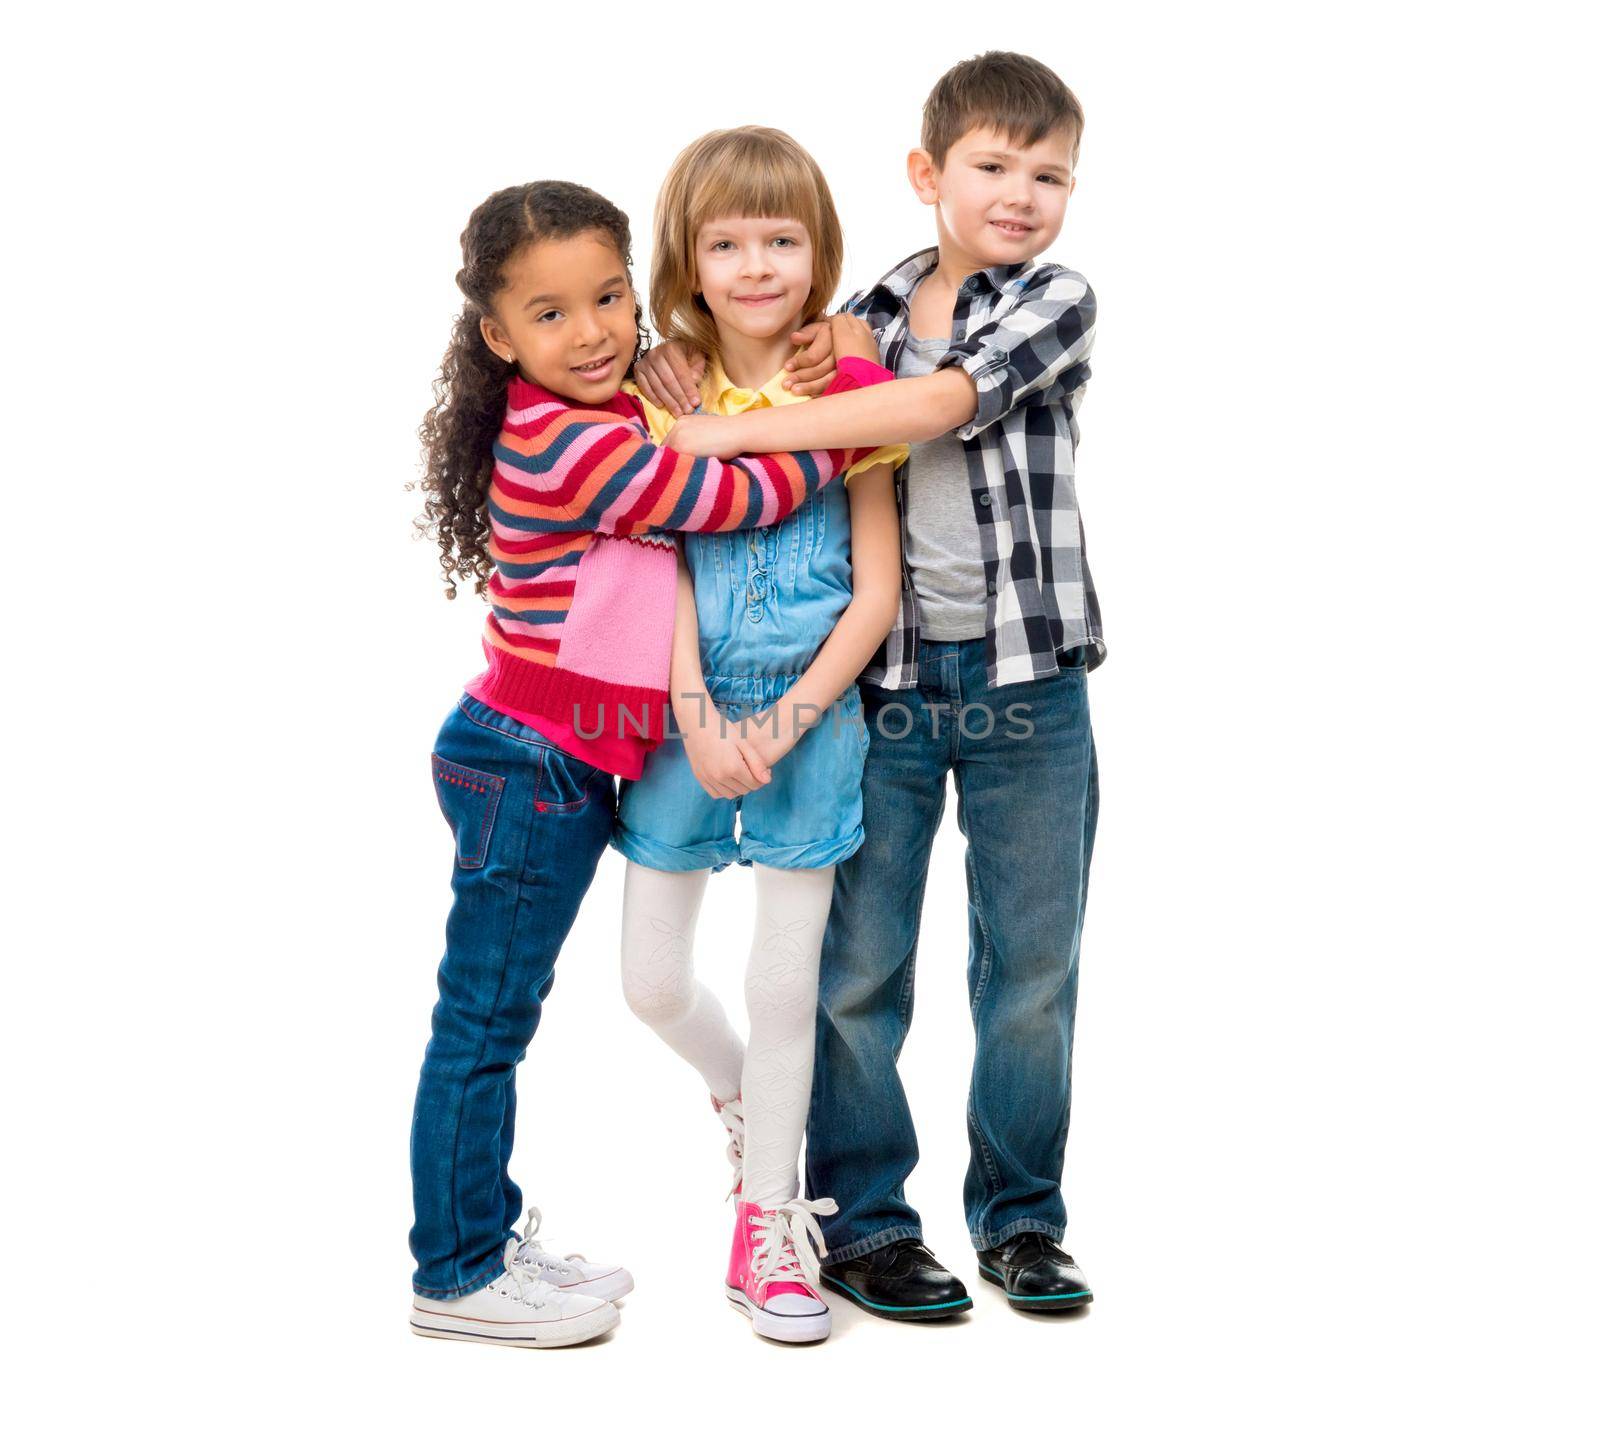 three smiling little children standing together isolated on white background